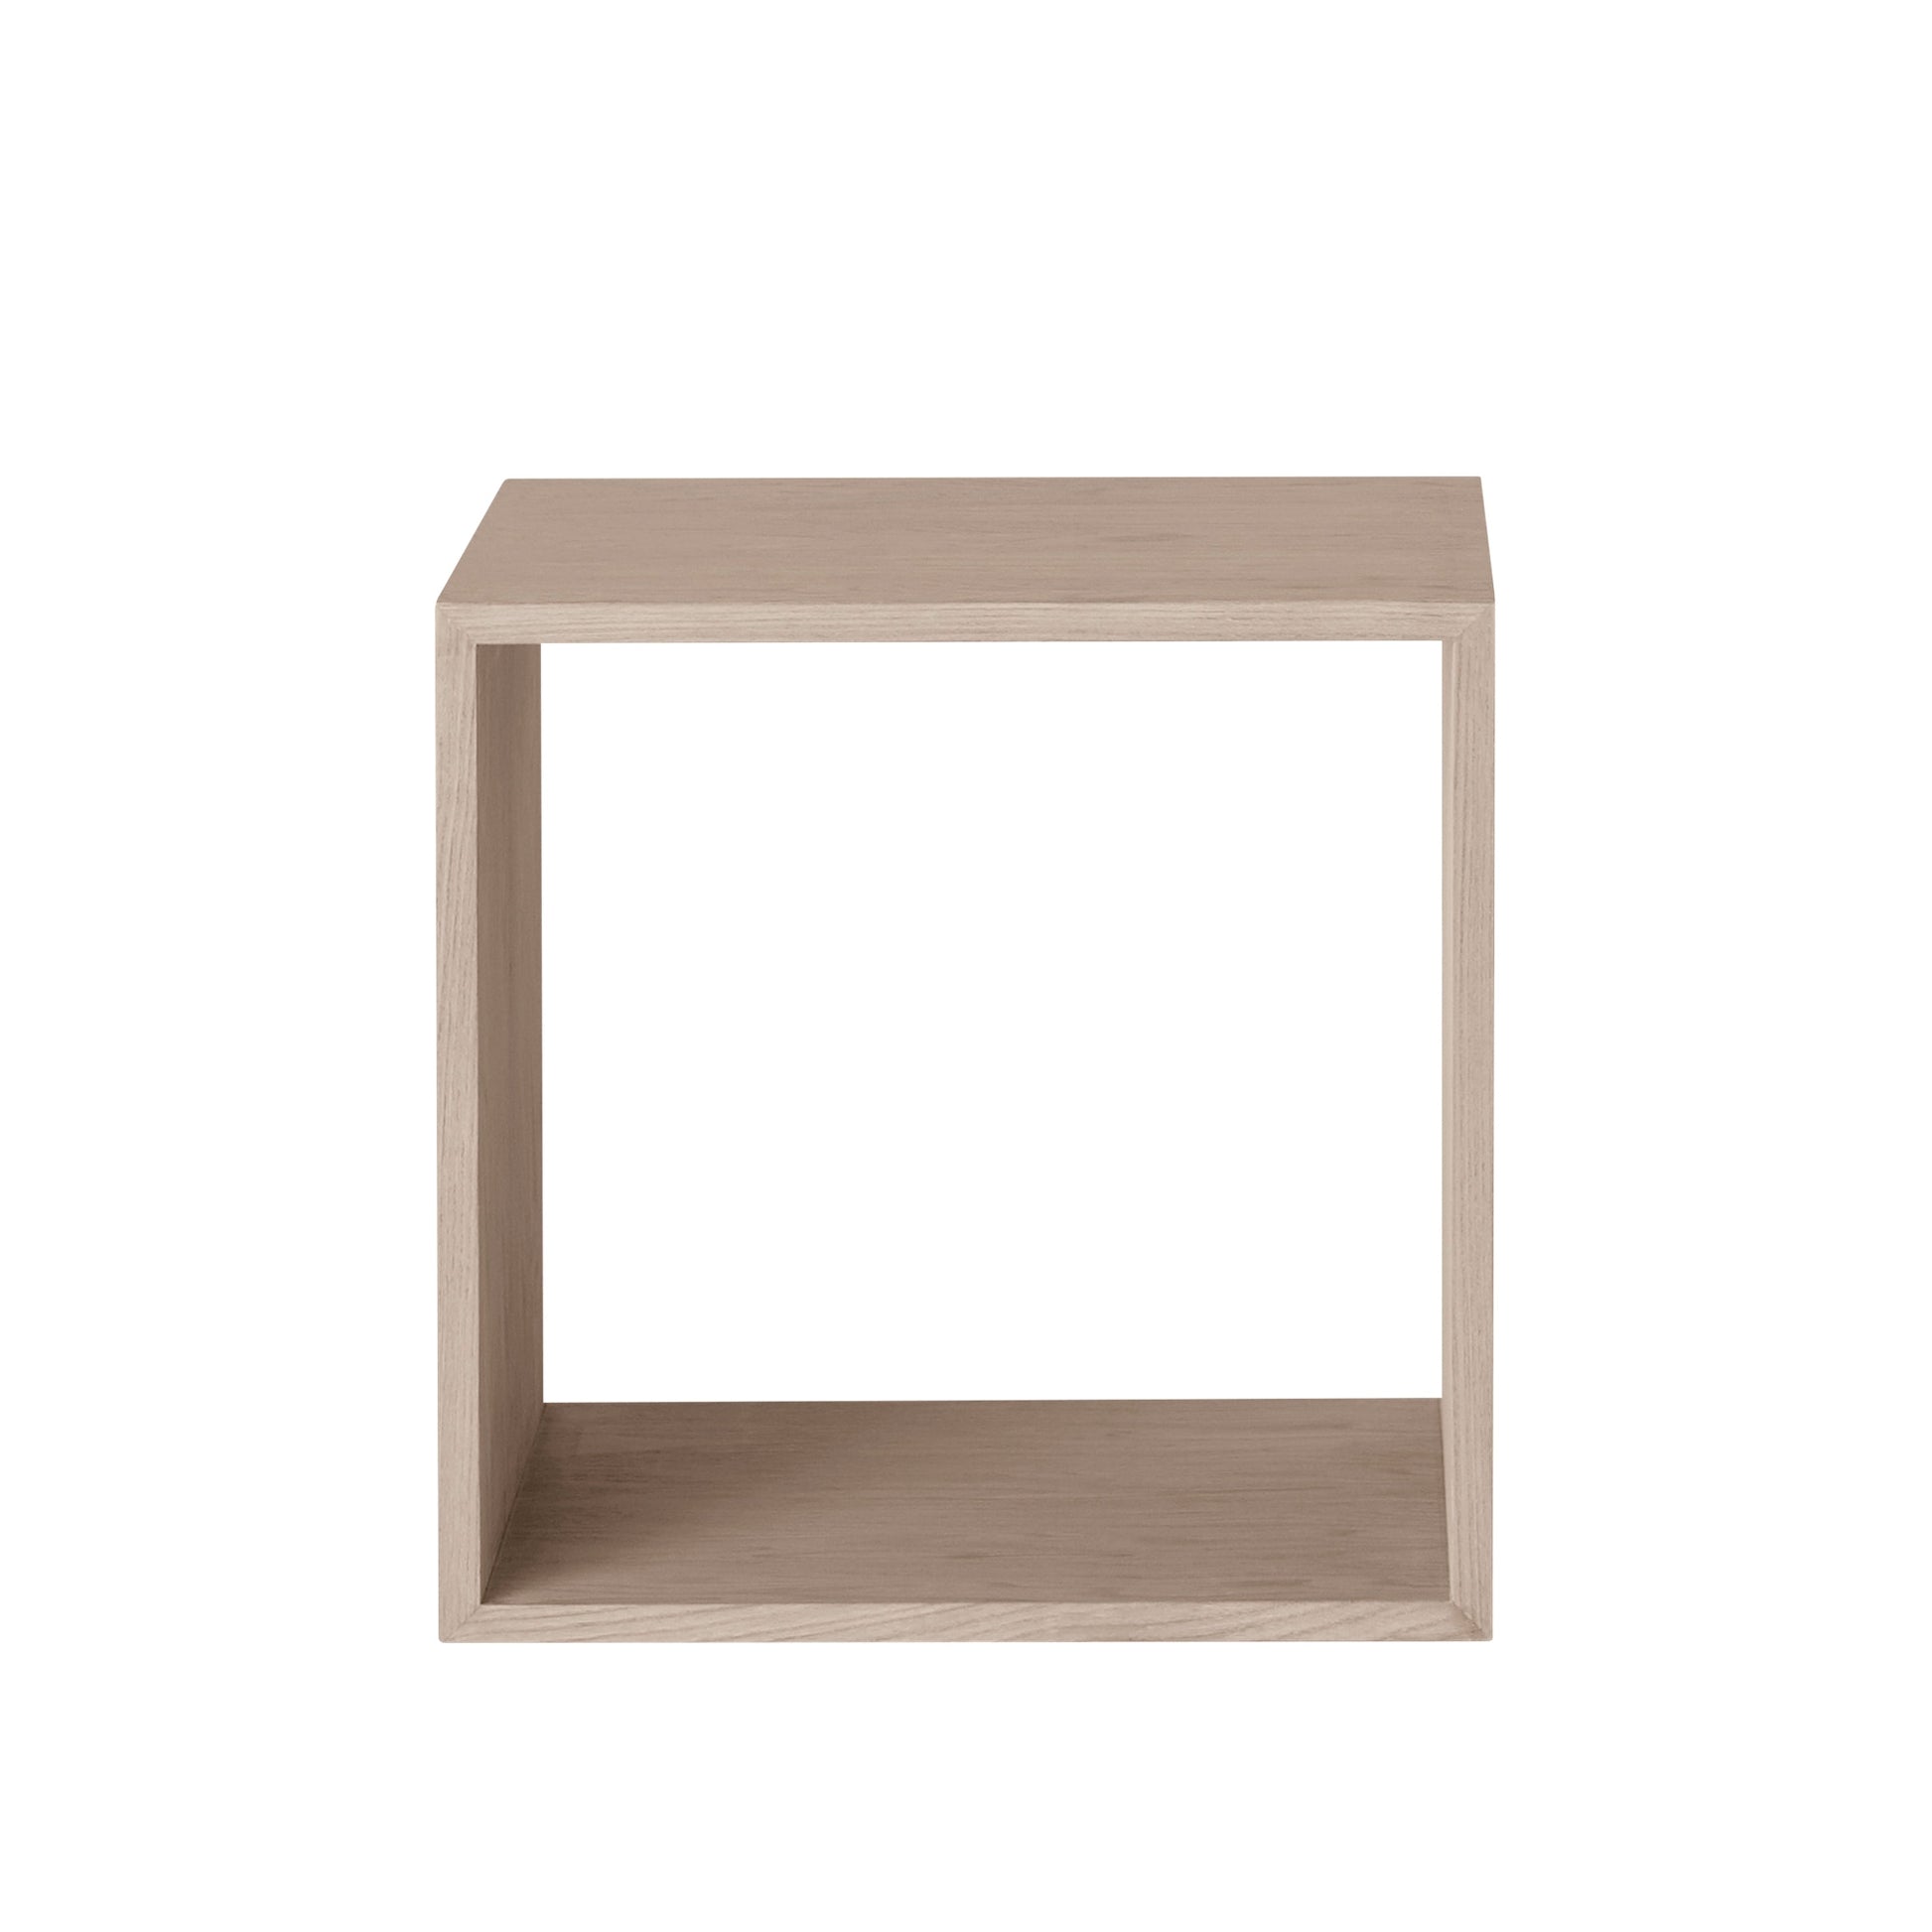 Stacked Shelving System by Muuto #Oak